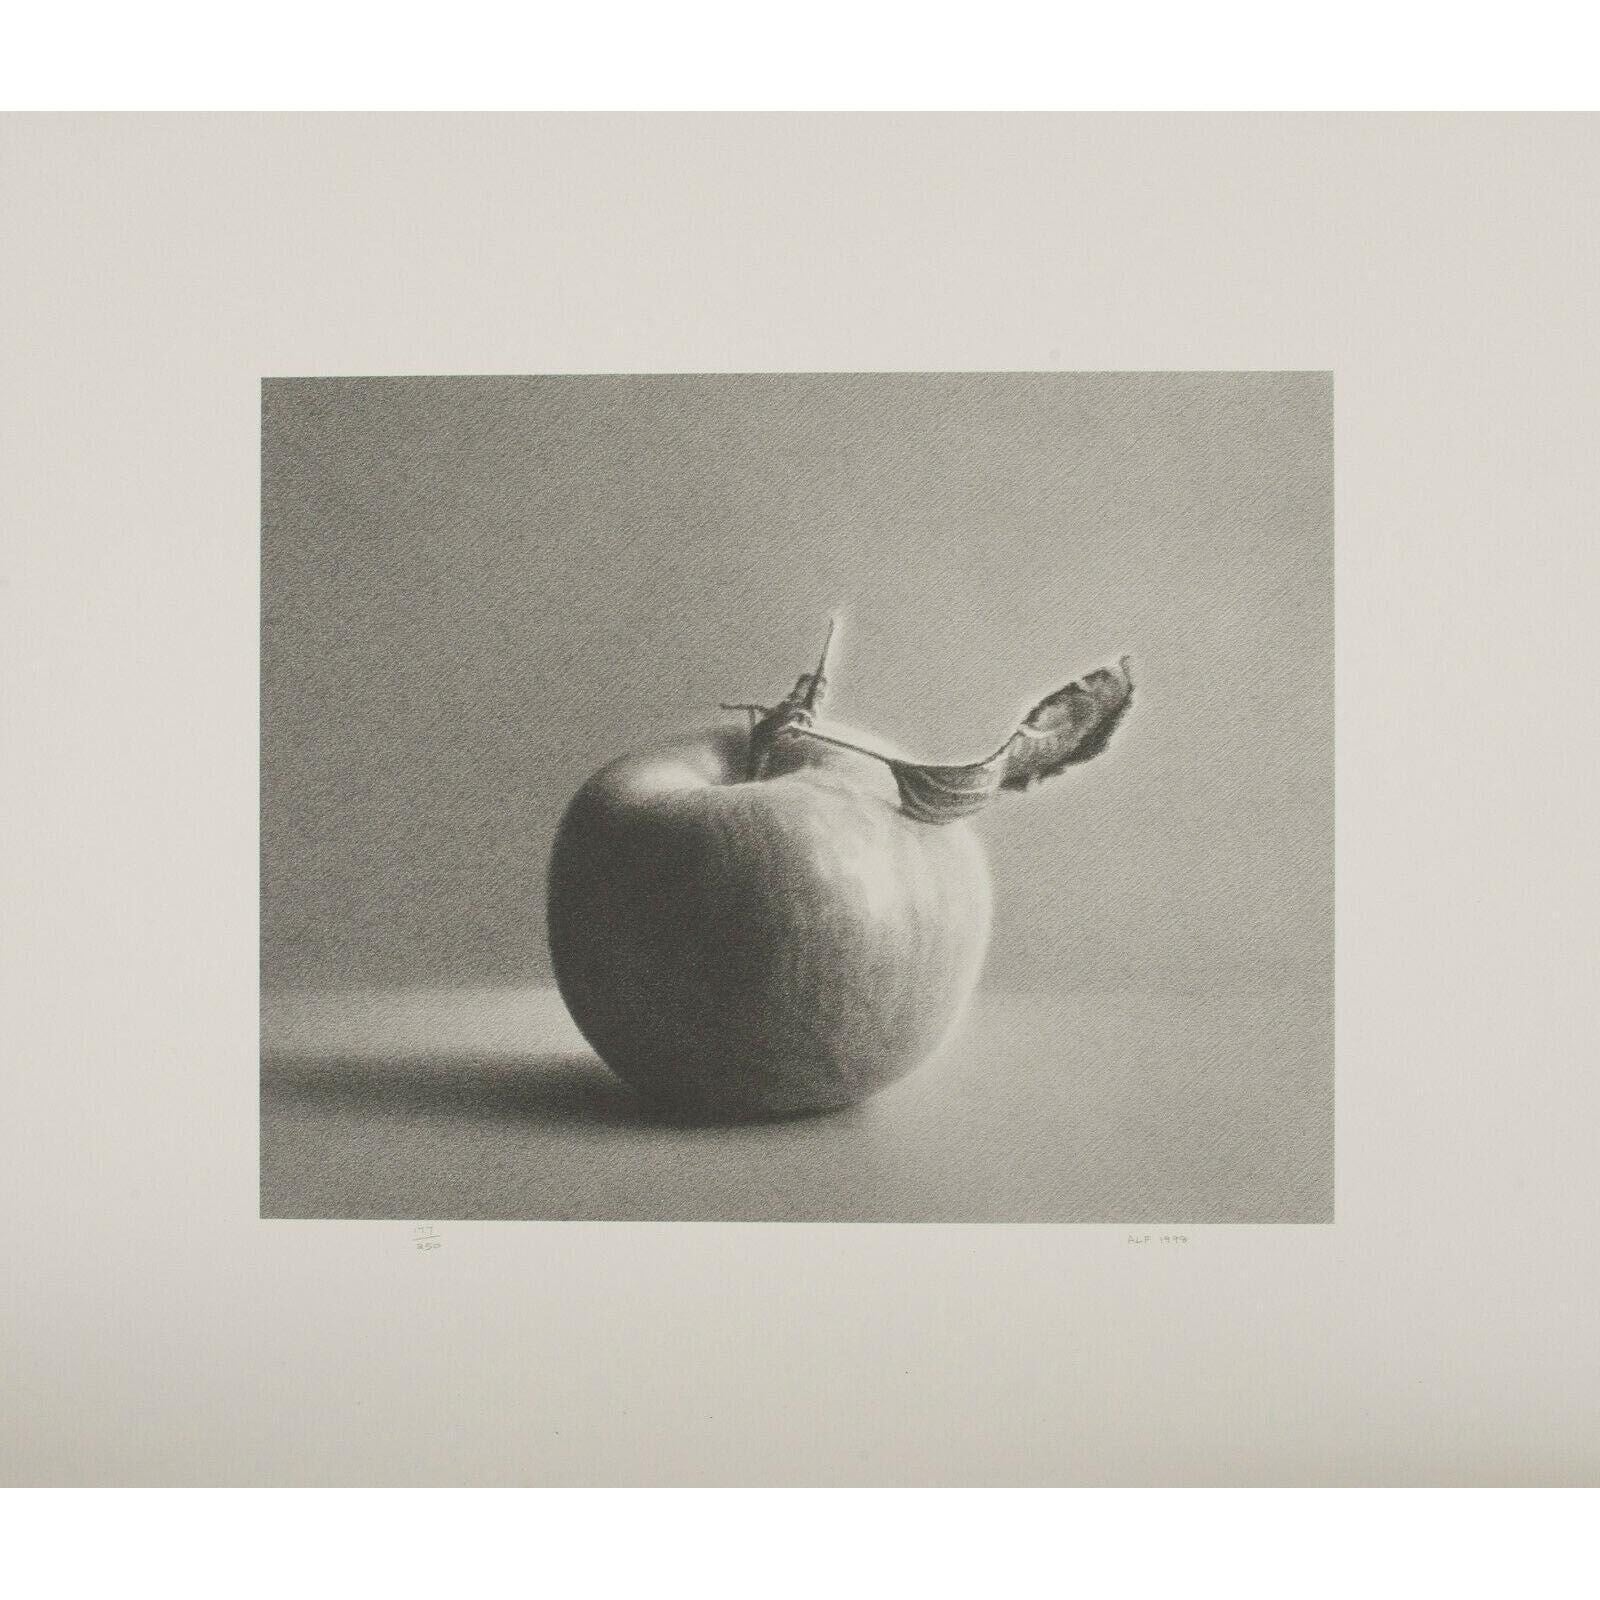 Martha Alf "Apple" Still Life Lithograph Print Limited Edition of 250 Signed For Sale